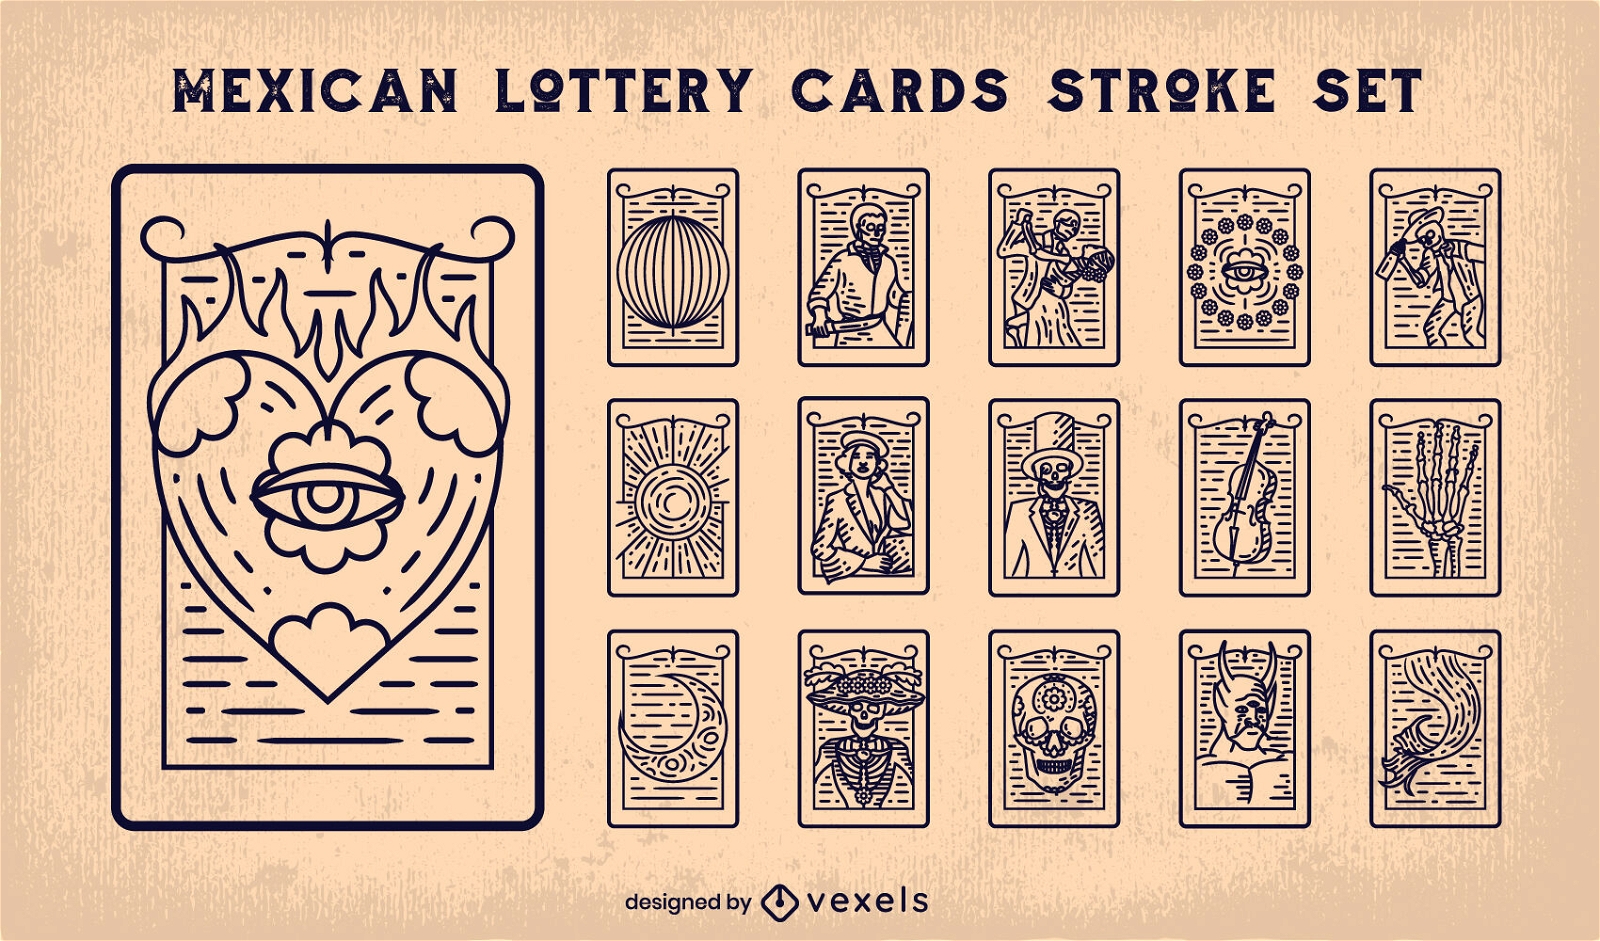 Mexican lottery cards stroke set